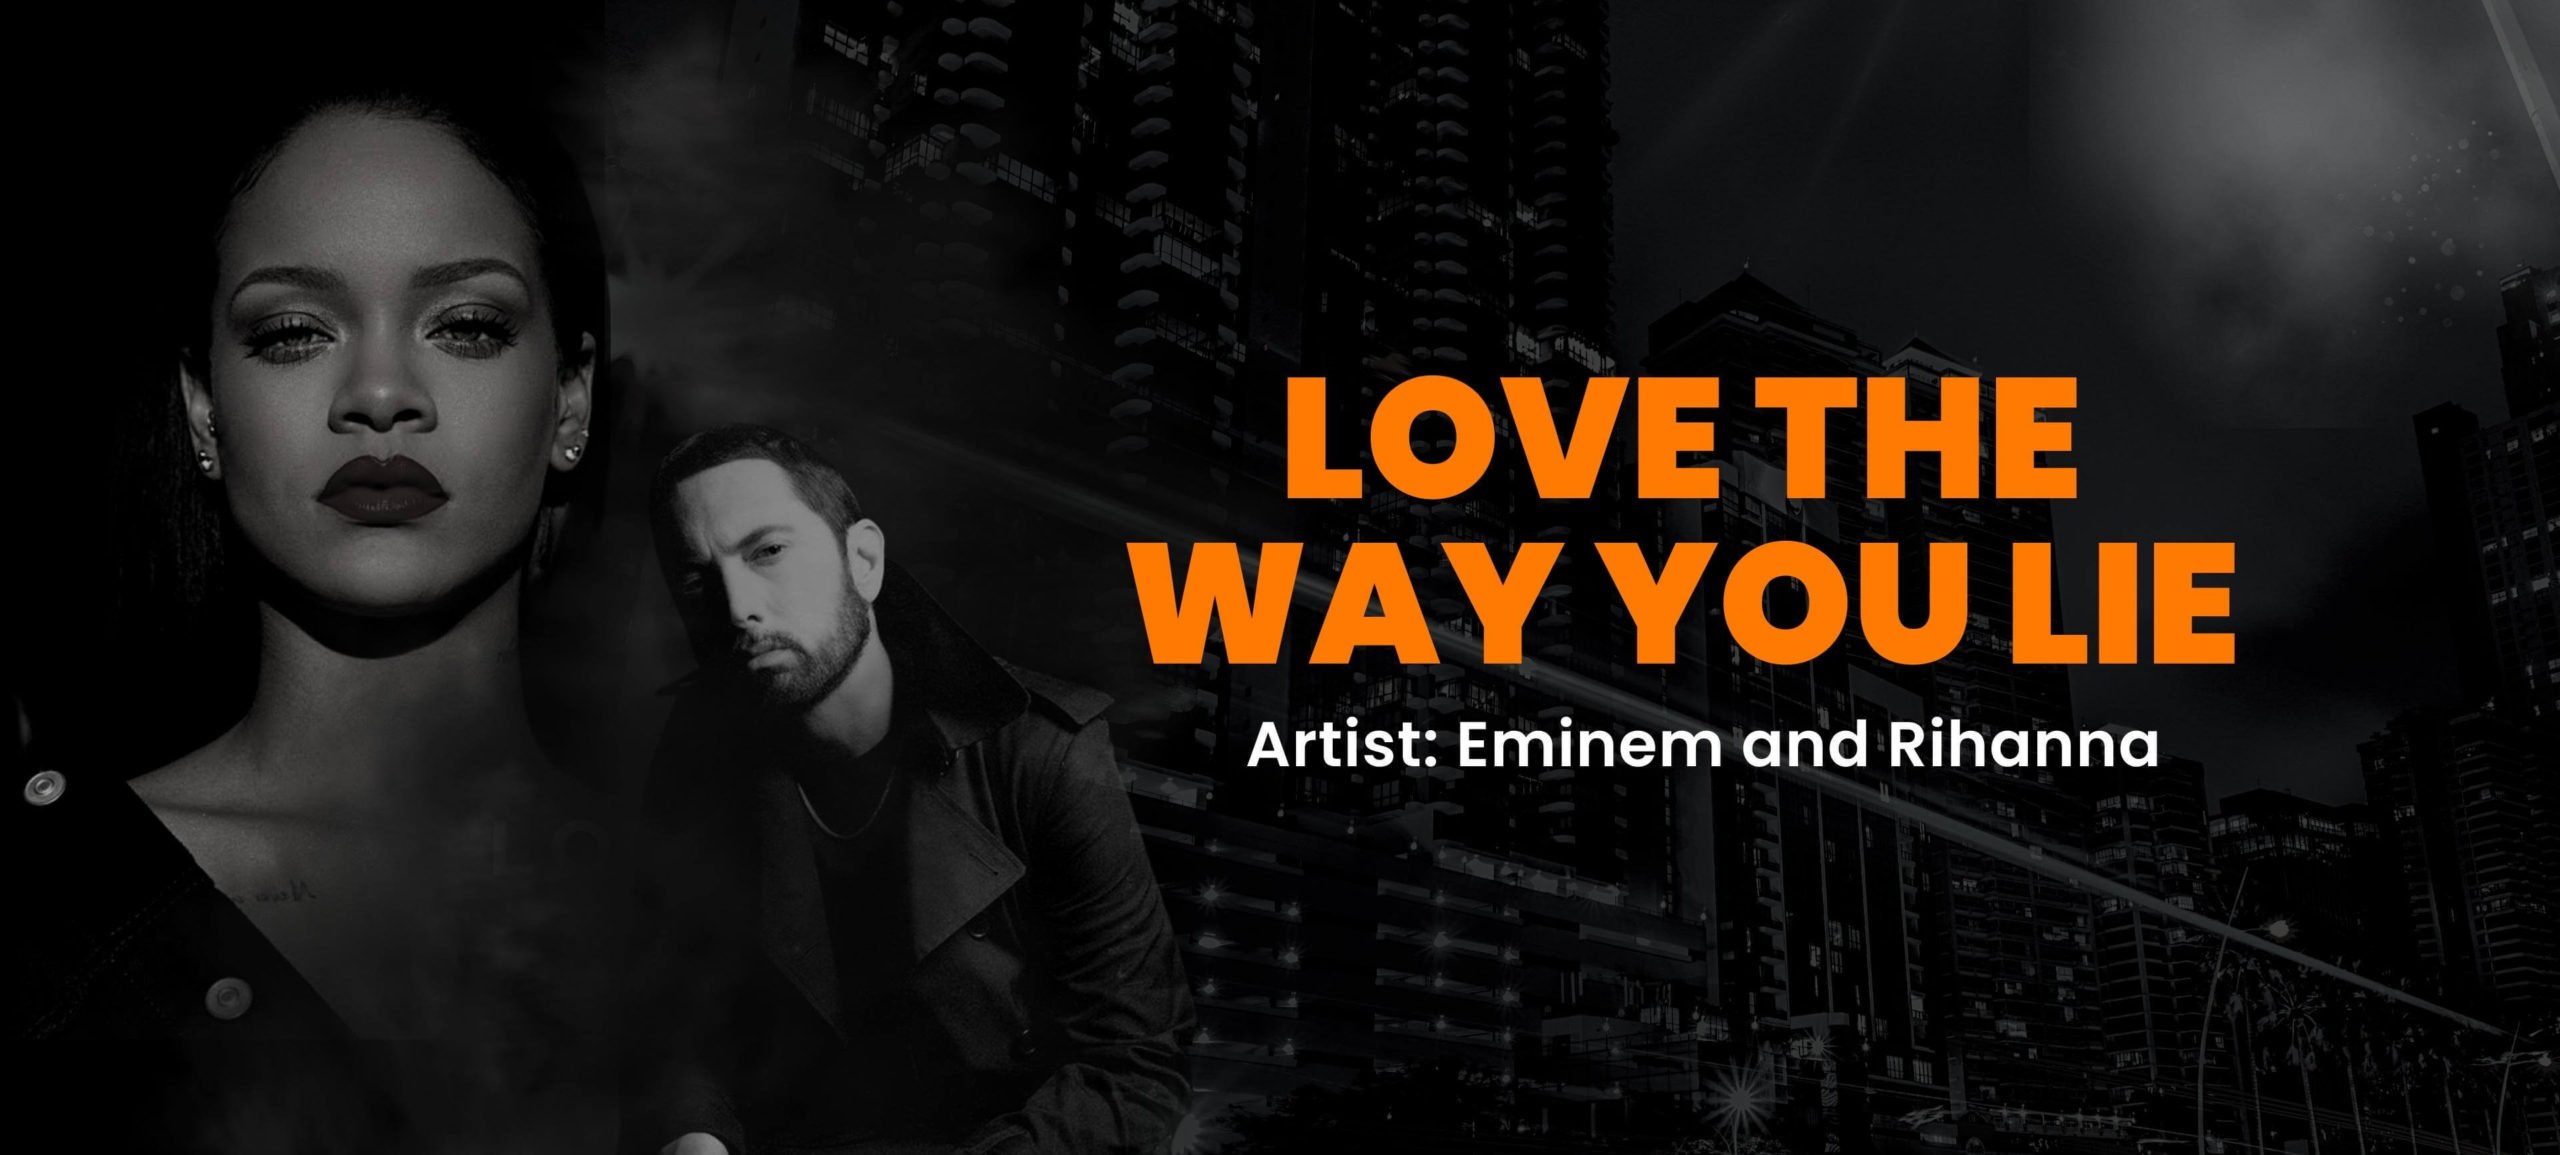 Love The Way You Lie " Streamed Song on Spotify